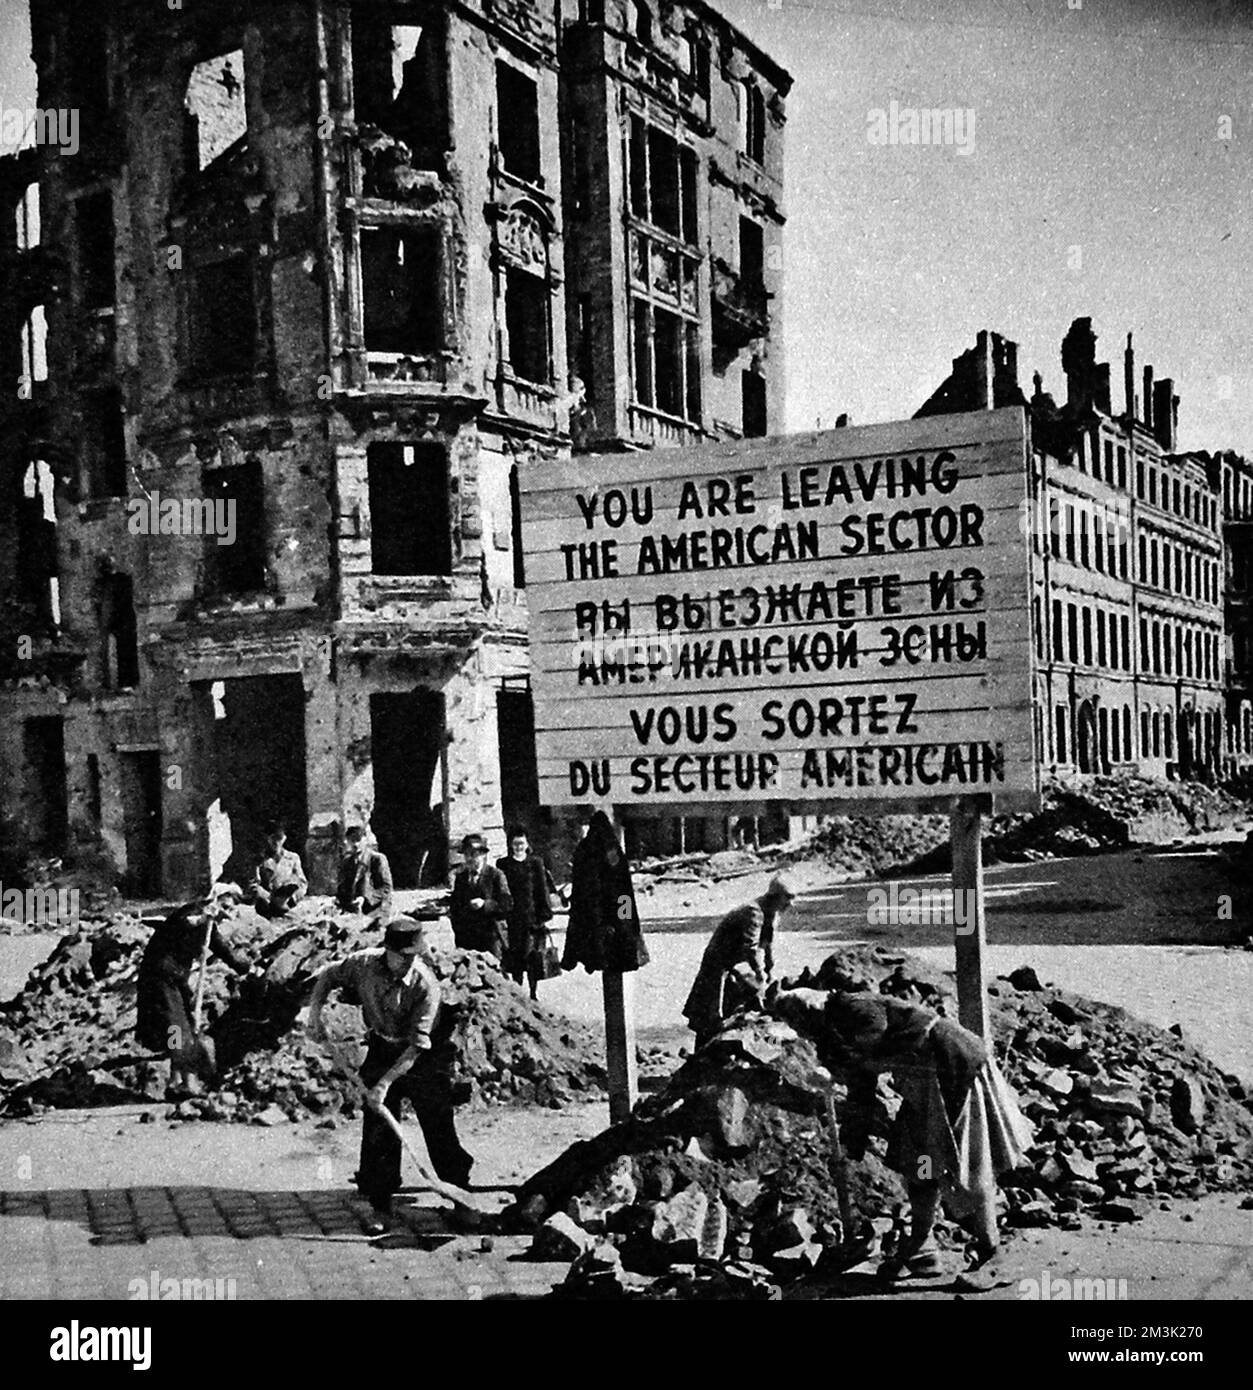 Photograph showing German men and women removing the rubble barricades between the American Sector and the Soviet Sector of Berlin at the end of the Berlin Blockade, May 1949.    Between April 1948 and May 1949 Josef Stalin, leader of the USSR, imposed a land blockade on supplies from Western Europe to West Berlin.  In response the British and American governments organised an enormous airlift to supply food and other essentials to the 2.5 million inhabitants of West Berlin.  After a year Stalin conceded defeat and lifted the blockade.     Date: 1949 Stock Photo